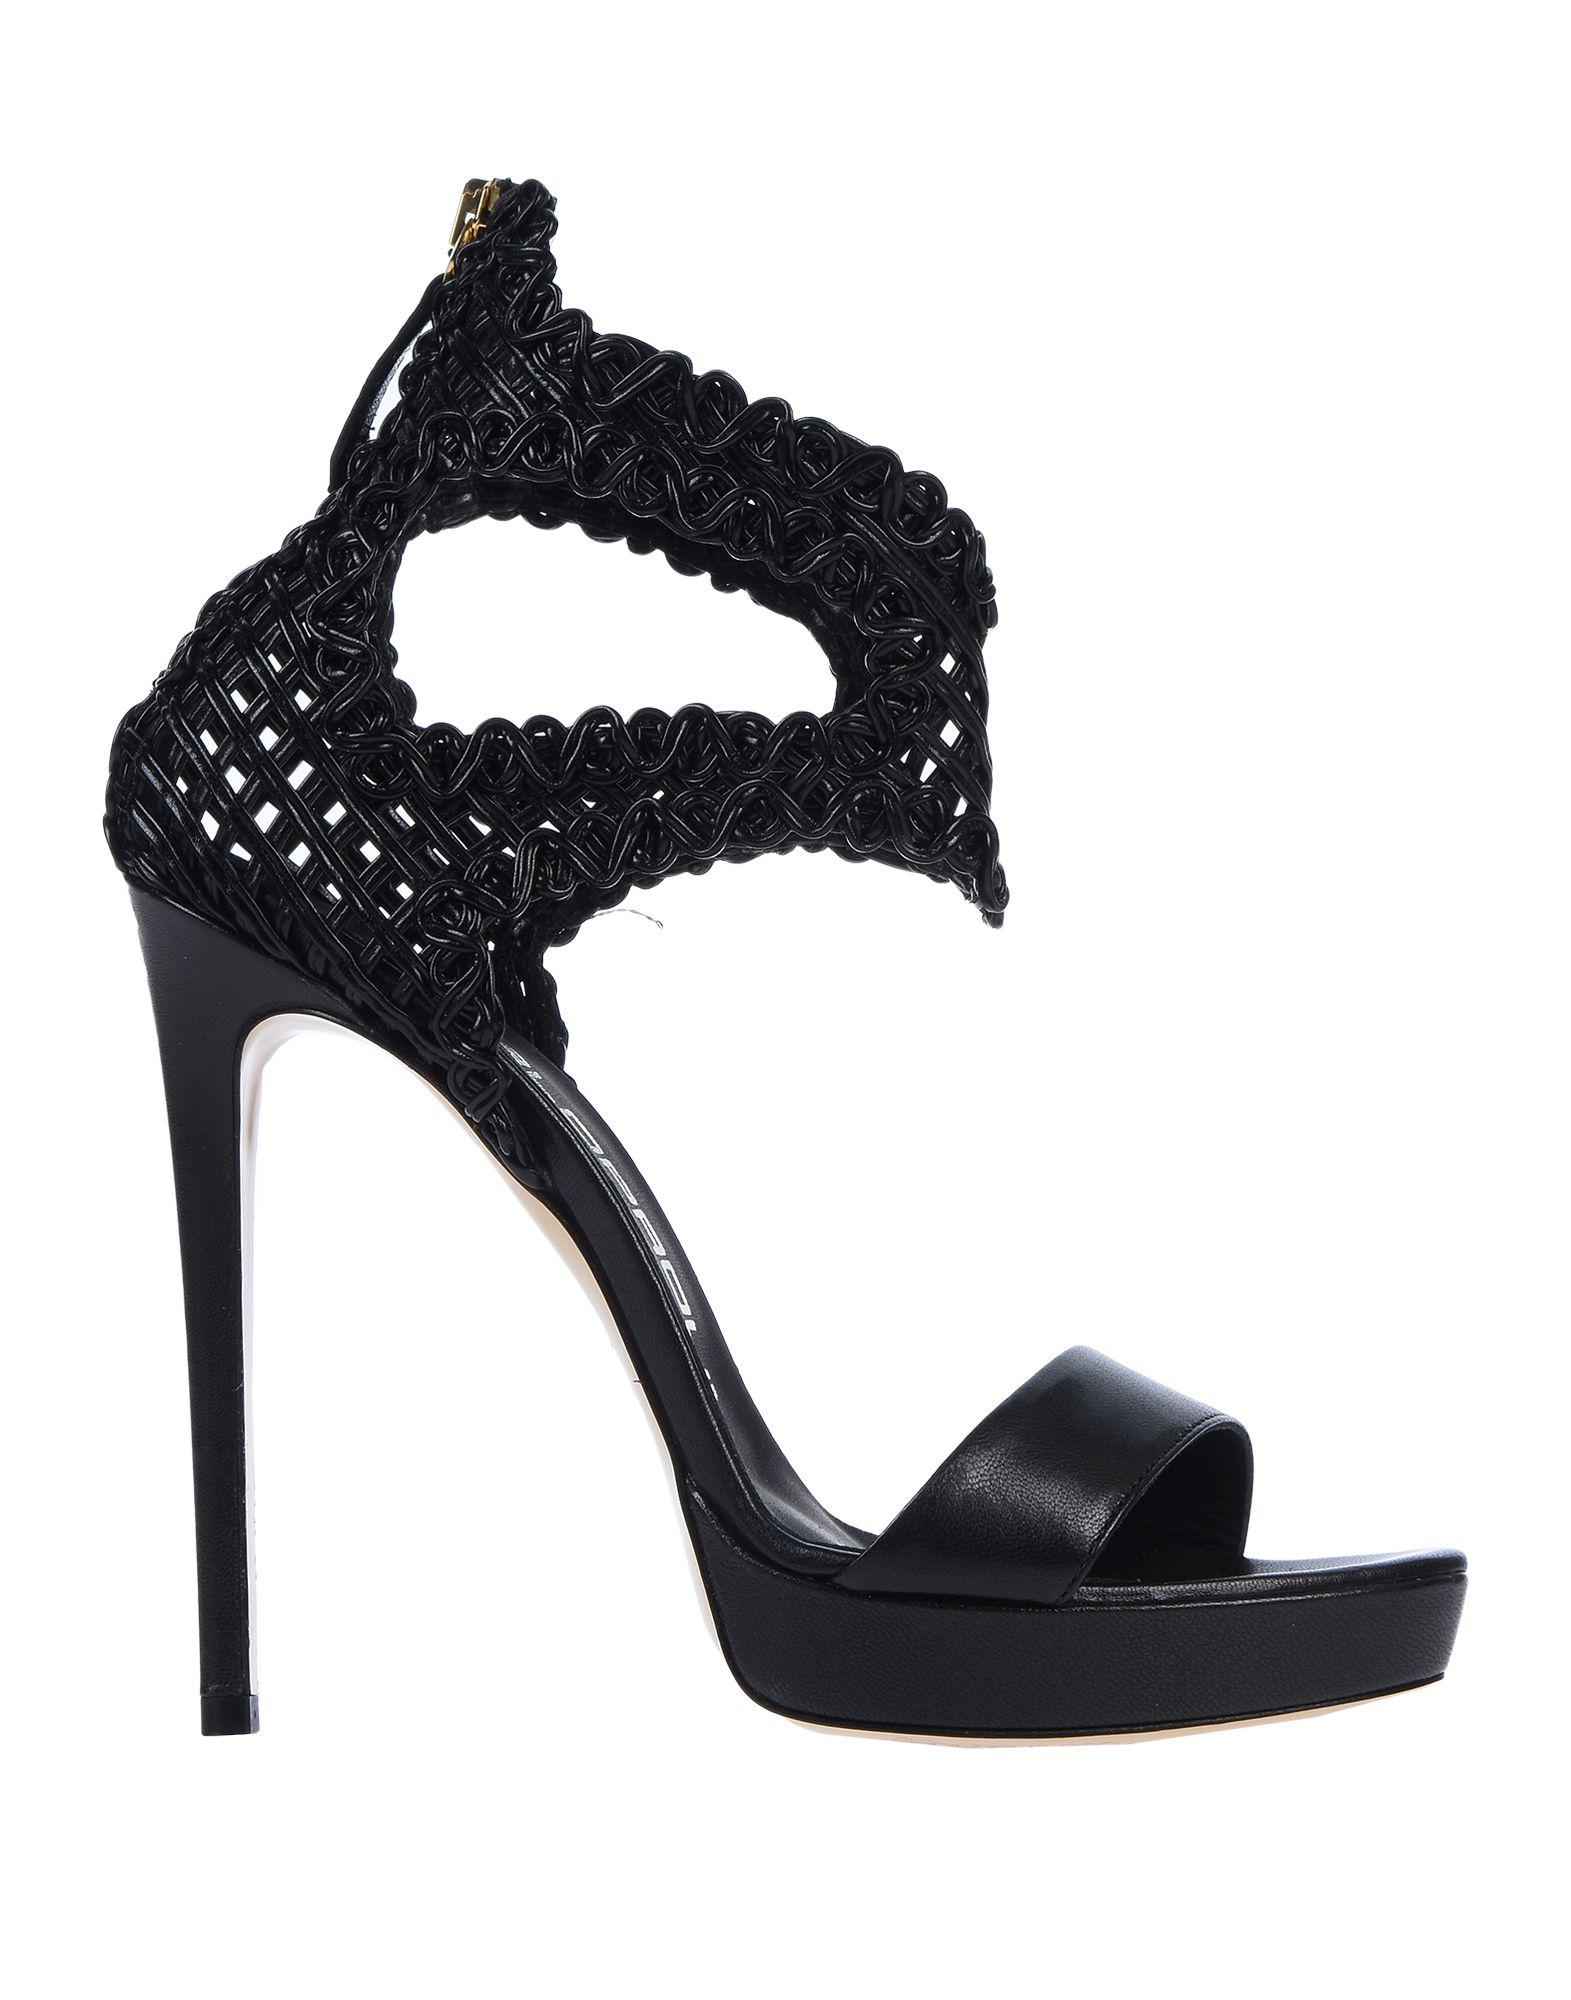 Giancarlo Paoli Leather Sandals in Black - Lyst